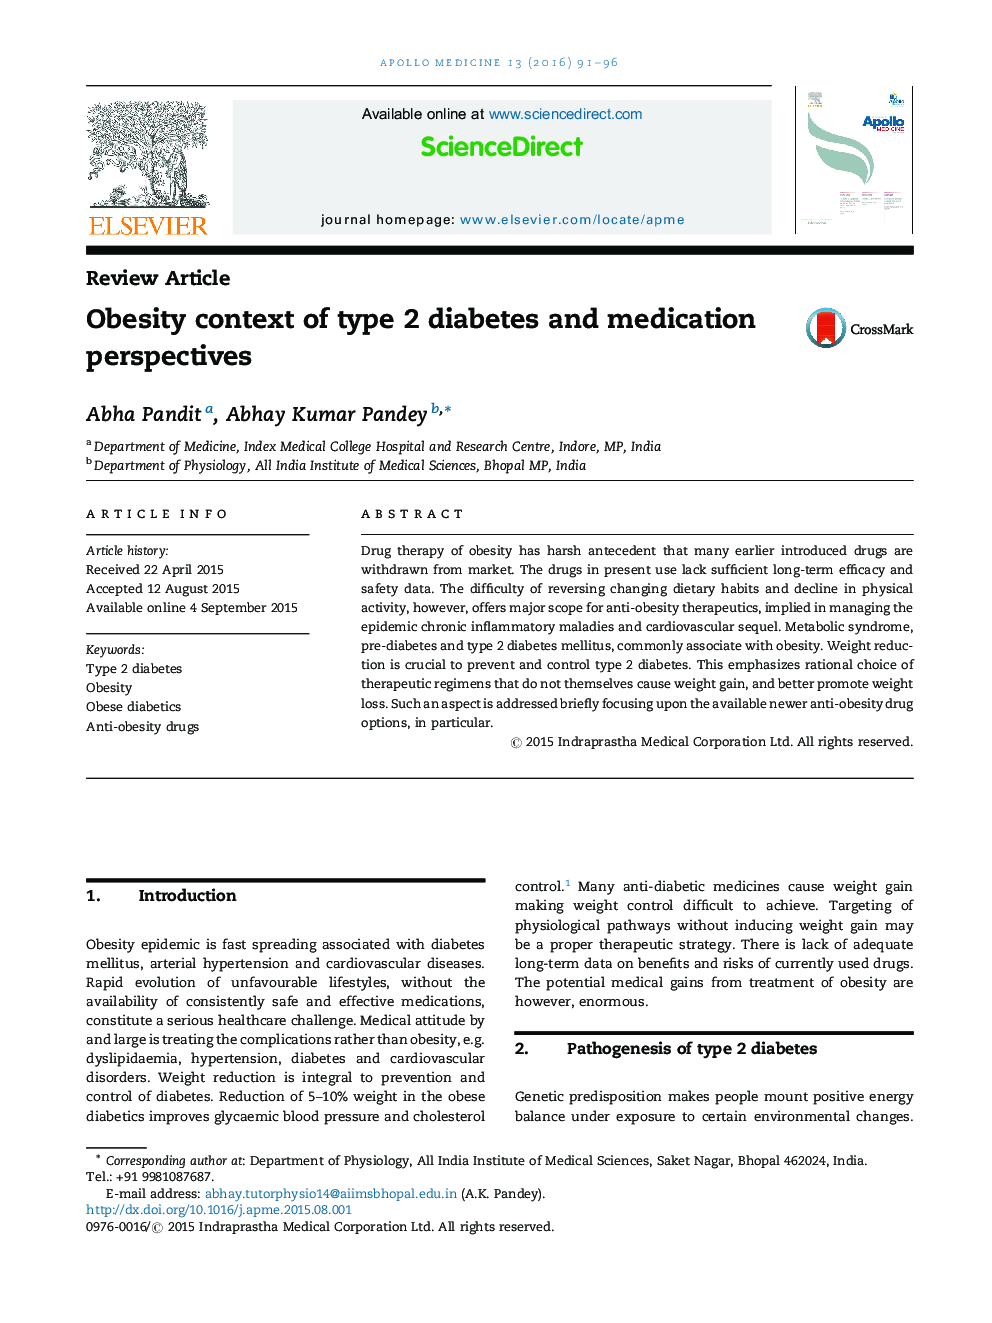 Obesity context of type 2 diabetes and medication perspectives